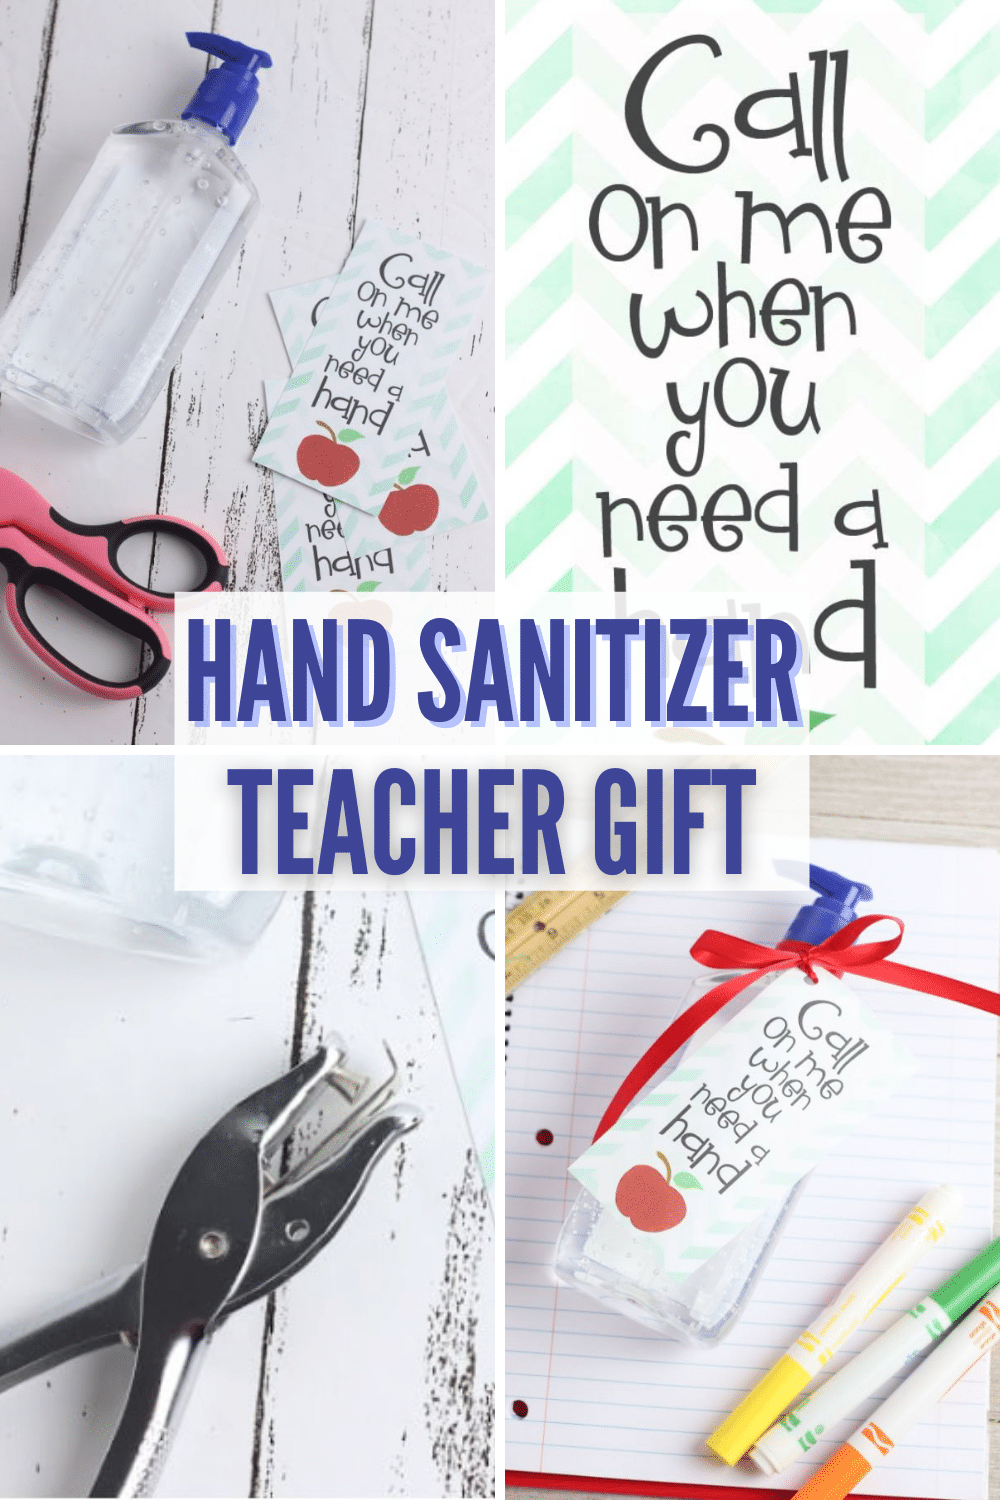 This Hand Sanitizer Teacher Gift is quick to make with a cute printable tag. Give hand sanitizer gifts to teachers and all school staff to show you care. #teachergifts #printables #printabletags via @wondermomwannab